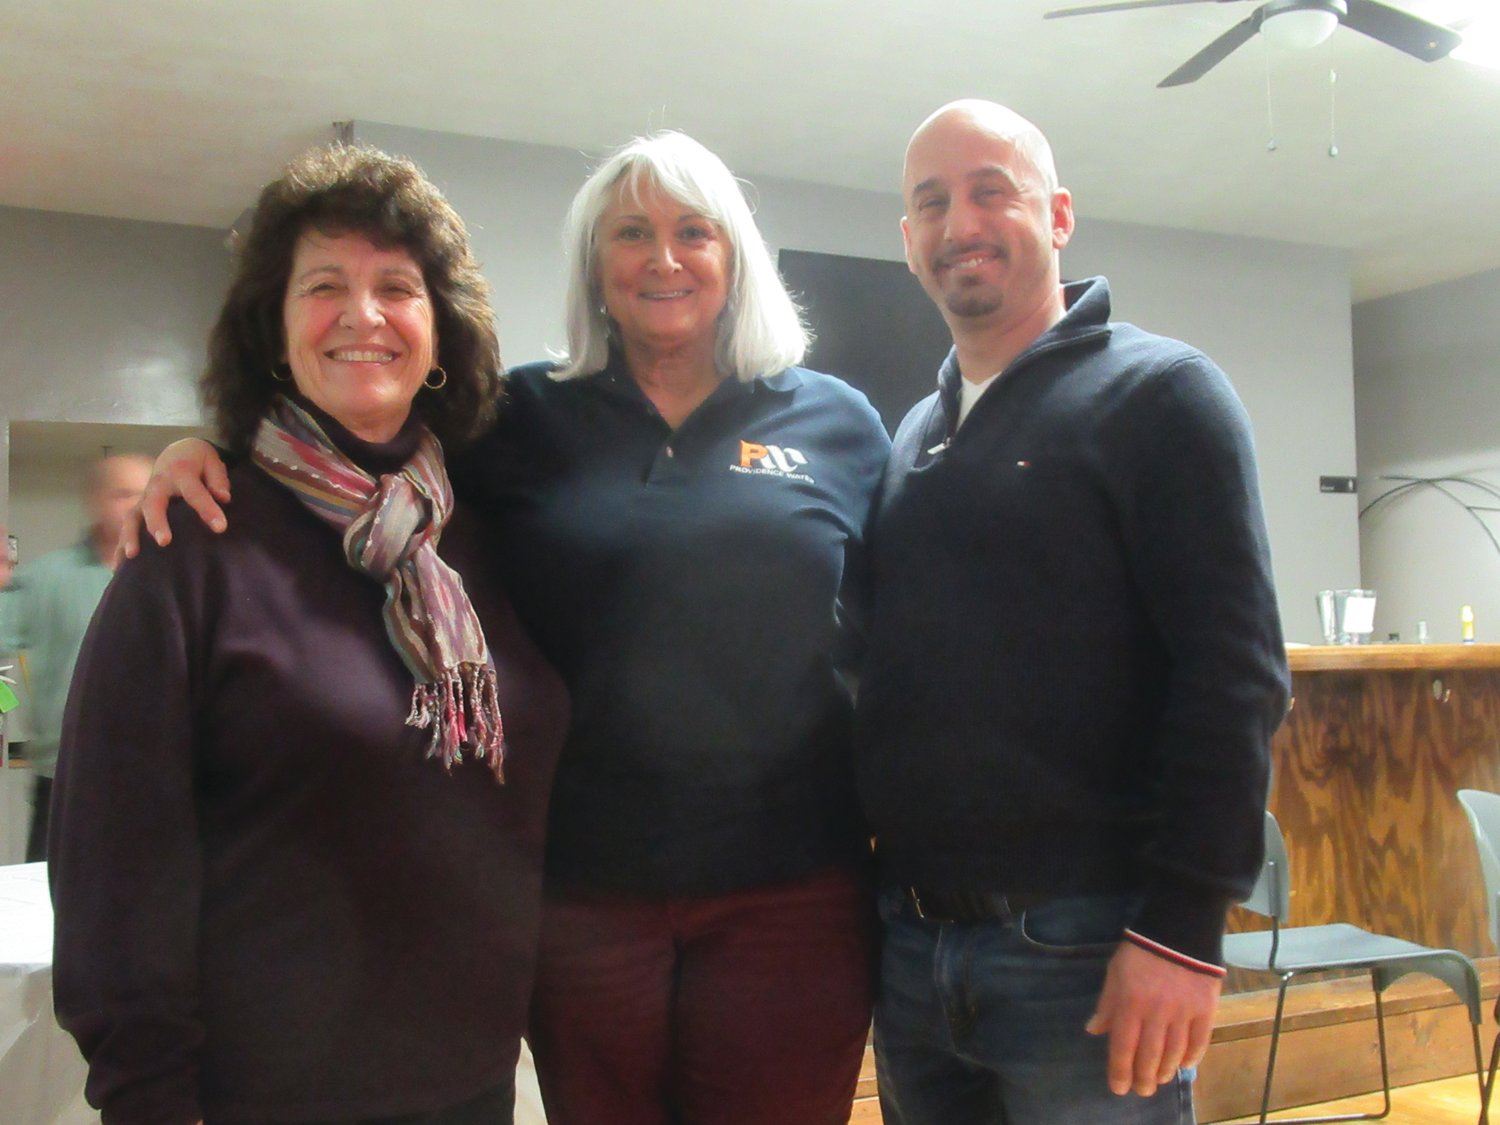 WARM WELCOME: Lauren Garzone (center) Vice President of the Johnston Town Council, is joined by Flore Turchetti and Frank DiMaio, who were elected the newest members of the Johnston Democratic Town Committee.